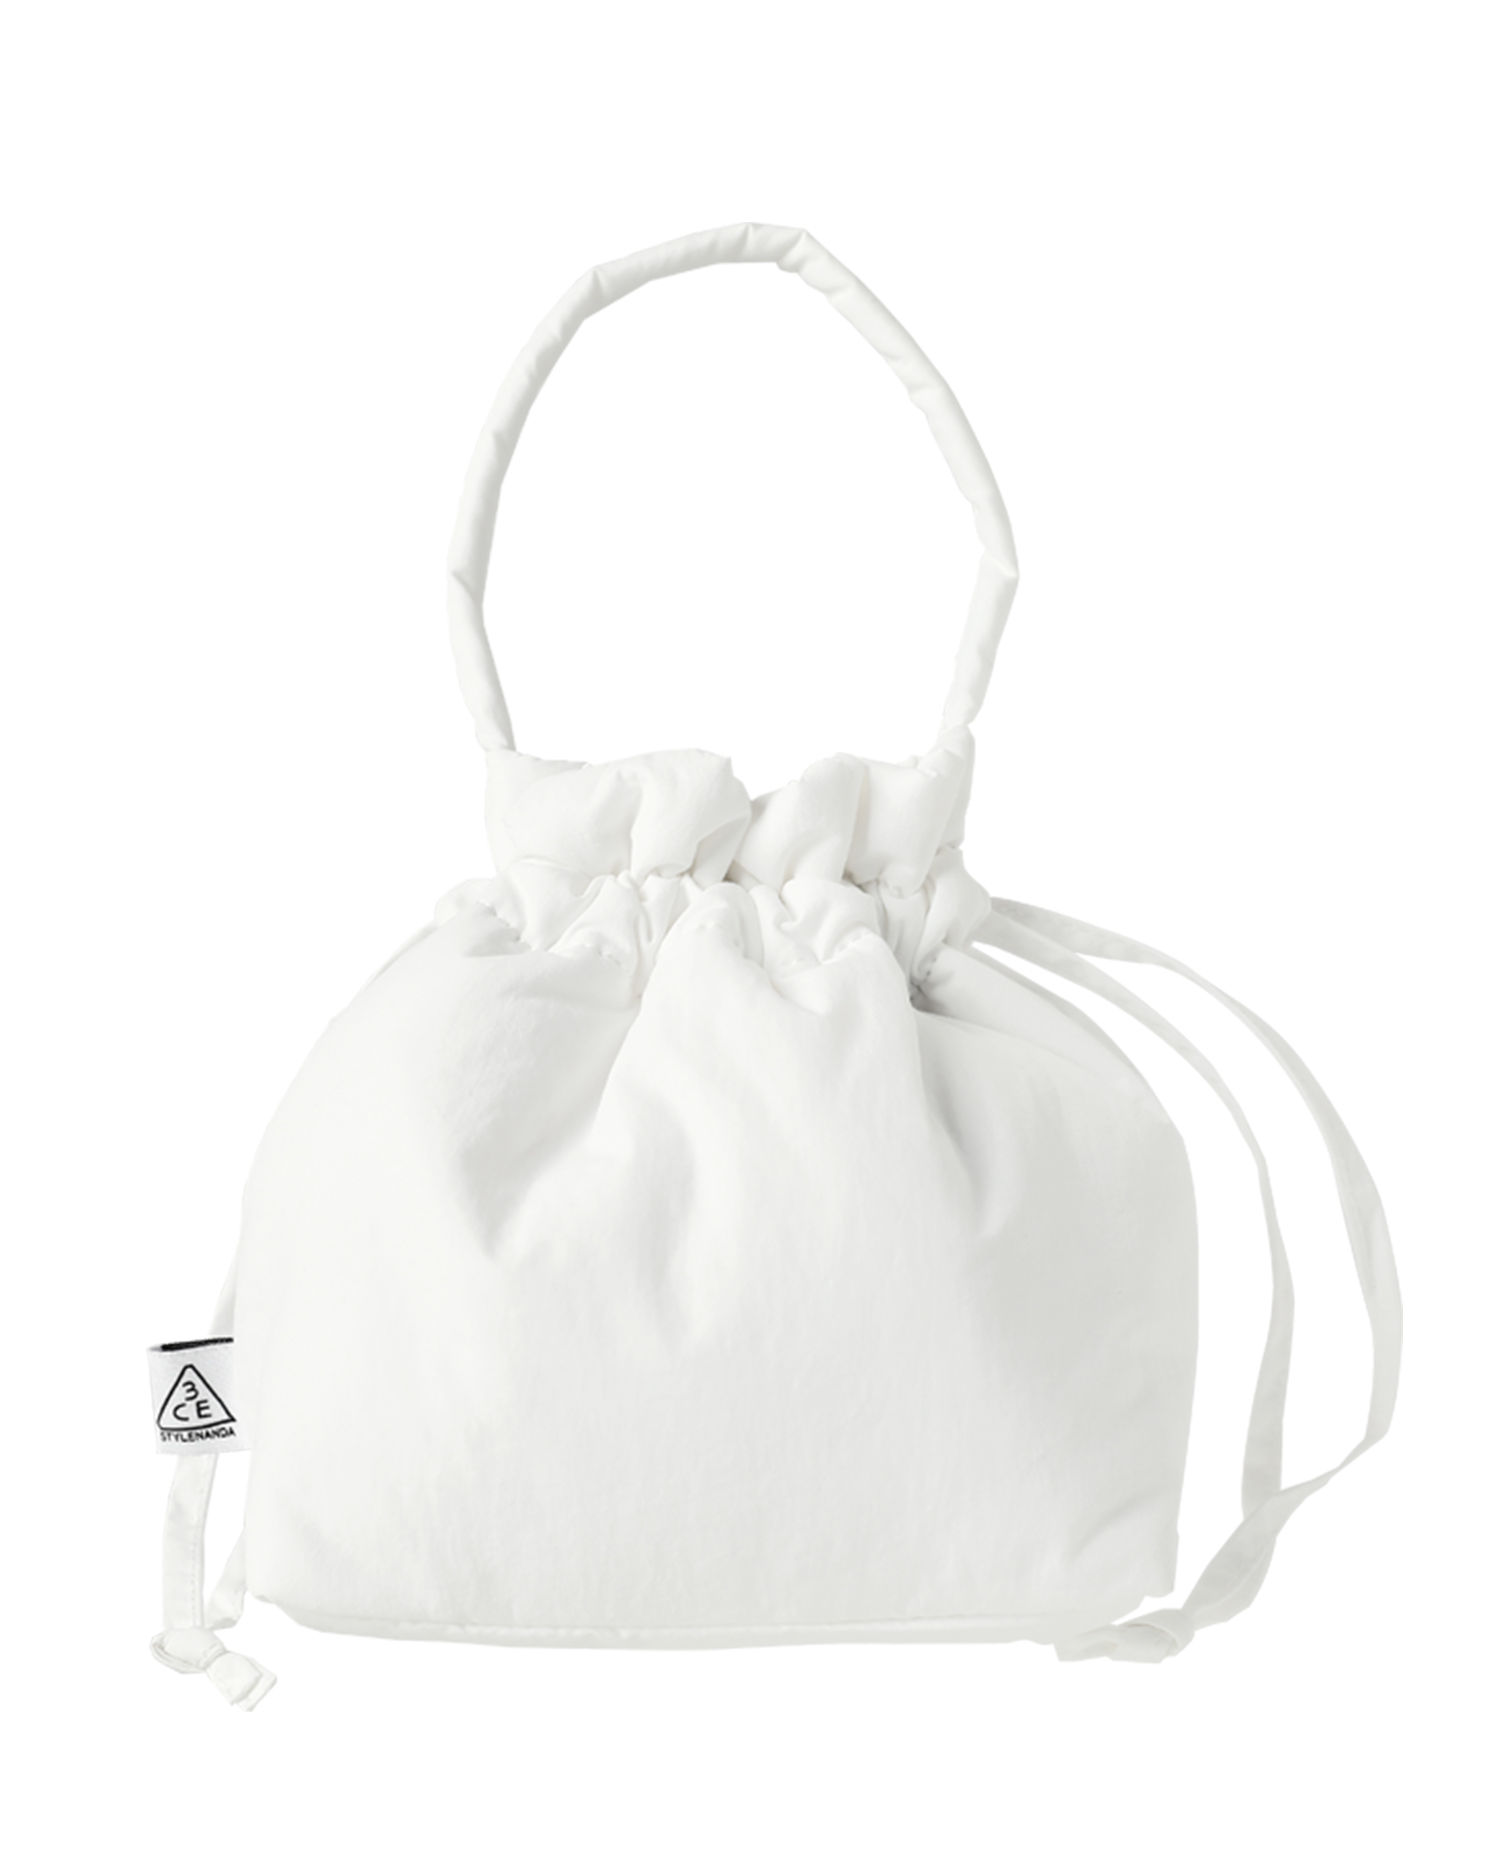 3CE Padded Bucket Bag 1ea  Best Price and Fast Shipping from Beauty Box  Korea